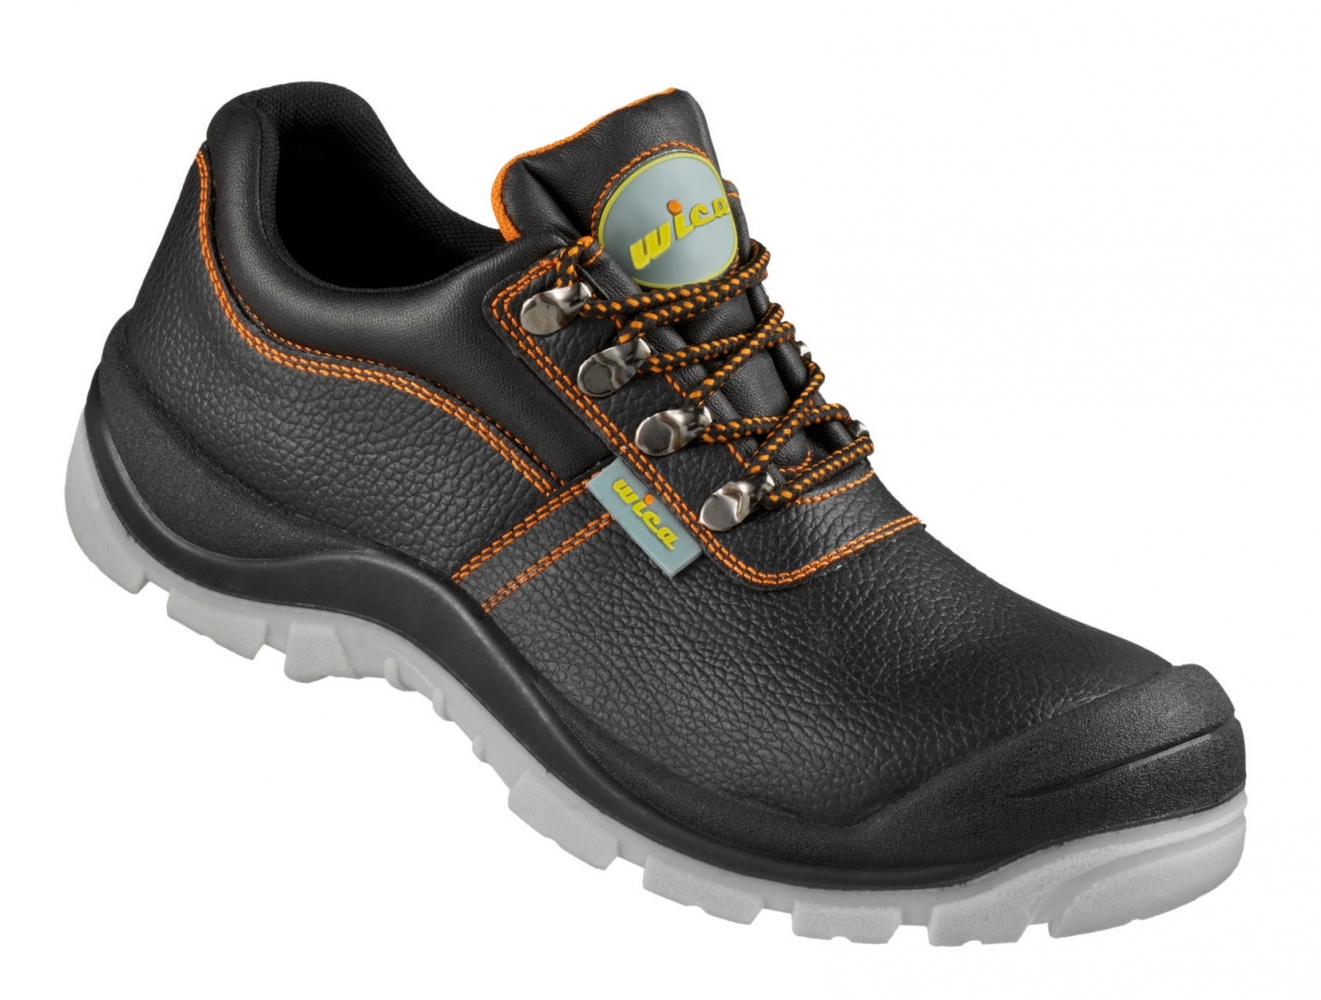 Wica 33335 RAGUSA ÜK safety shoes S3 